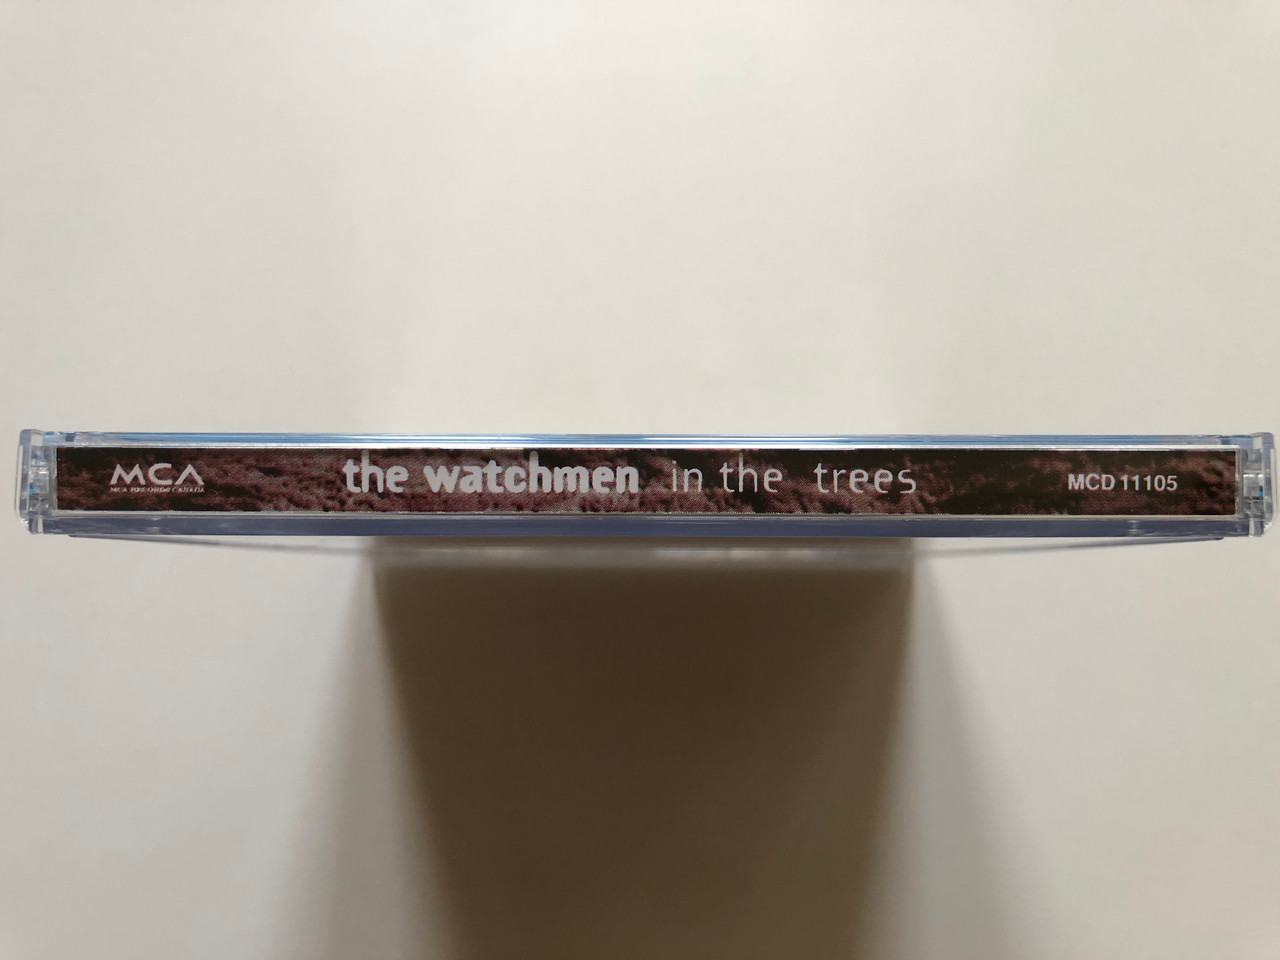 https://cdn10.bigcommerce.com/s-62bdpkt7pb/products/0/images/313296/The_Watchmen_In_The_Trees_MCA_Records_Audio_CD_1994_MCD_11105_3__15455.1700664731.1280.1280.JPG?c=2